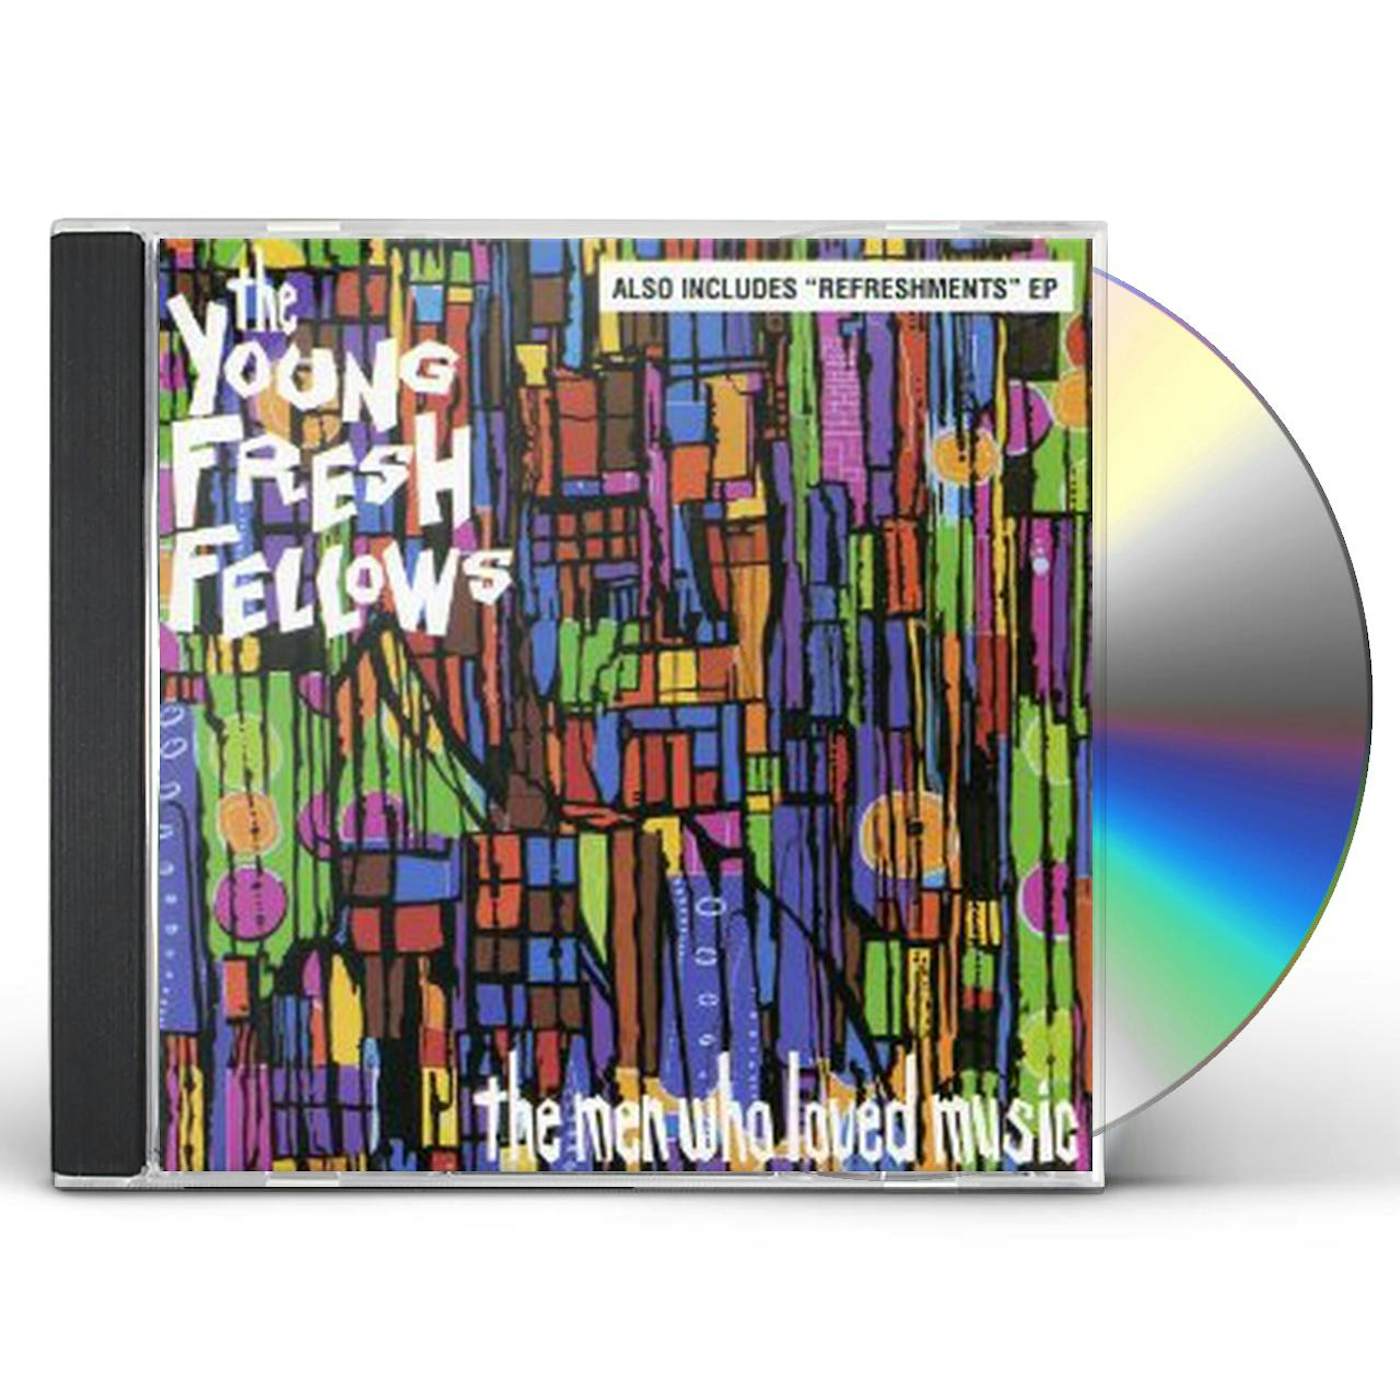 The Young Fresh Fellows MEN WHO LOVED MUSIC CD